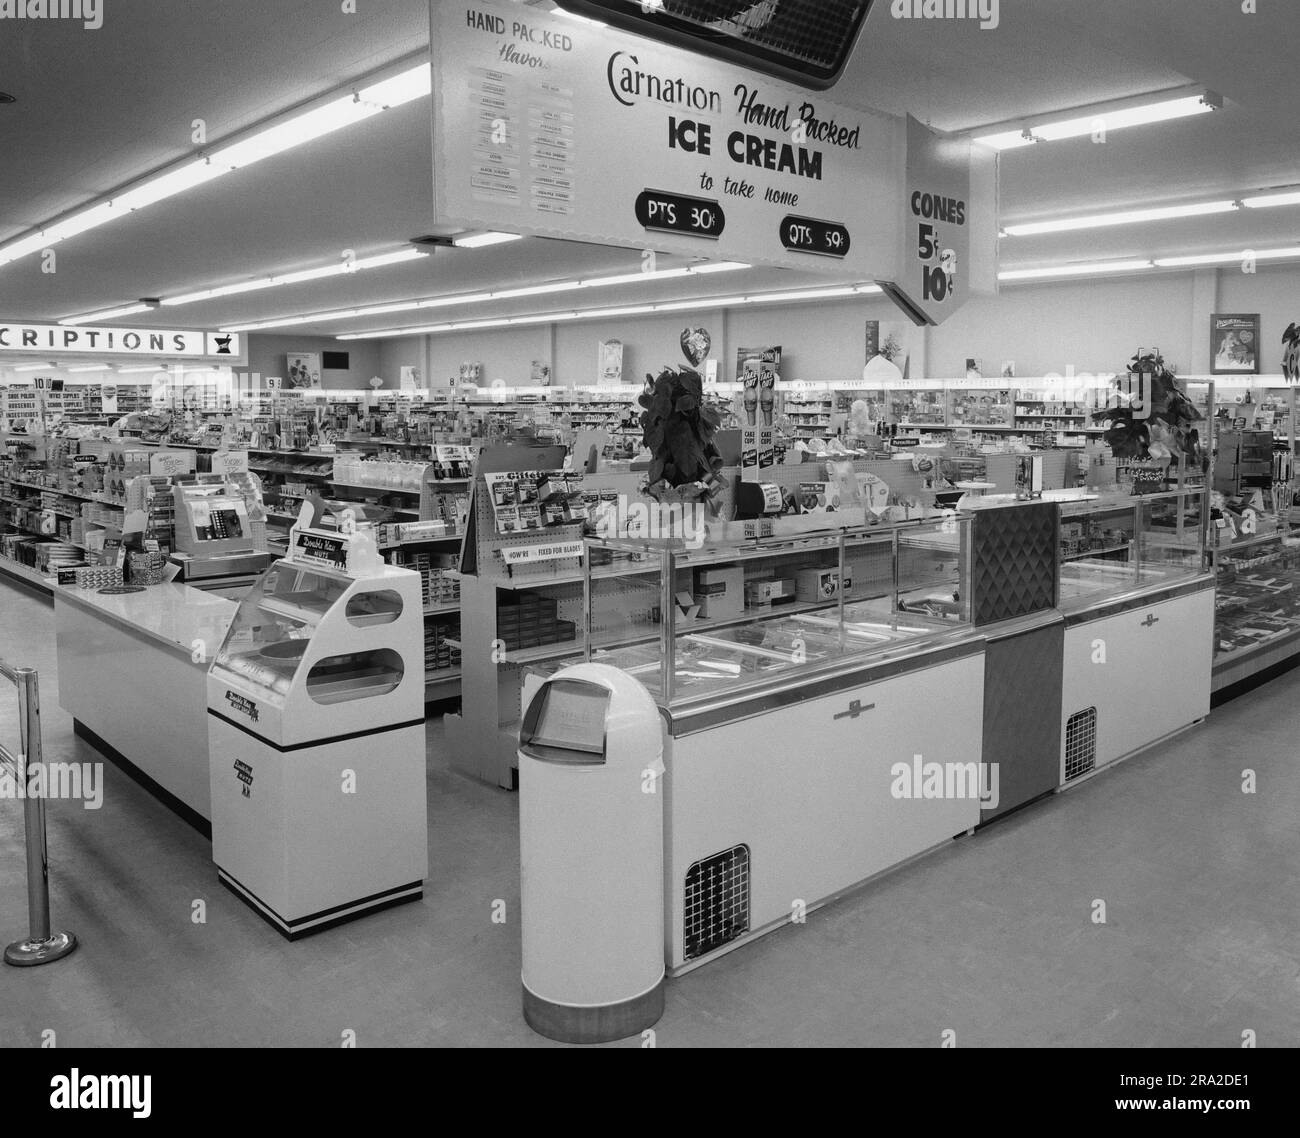 Inside of a drugstore showing the ice cream stand in the foreground. Ice cream cones, pints and quarts hand packed. Carnation ice cream Stock Photo